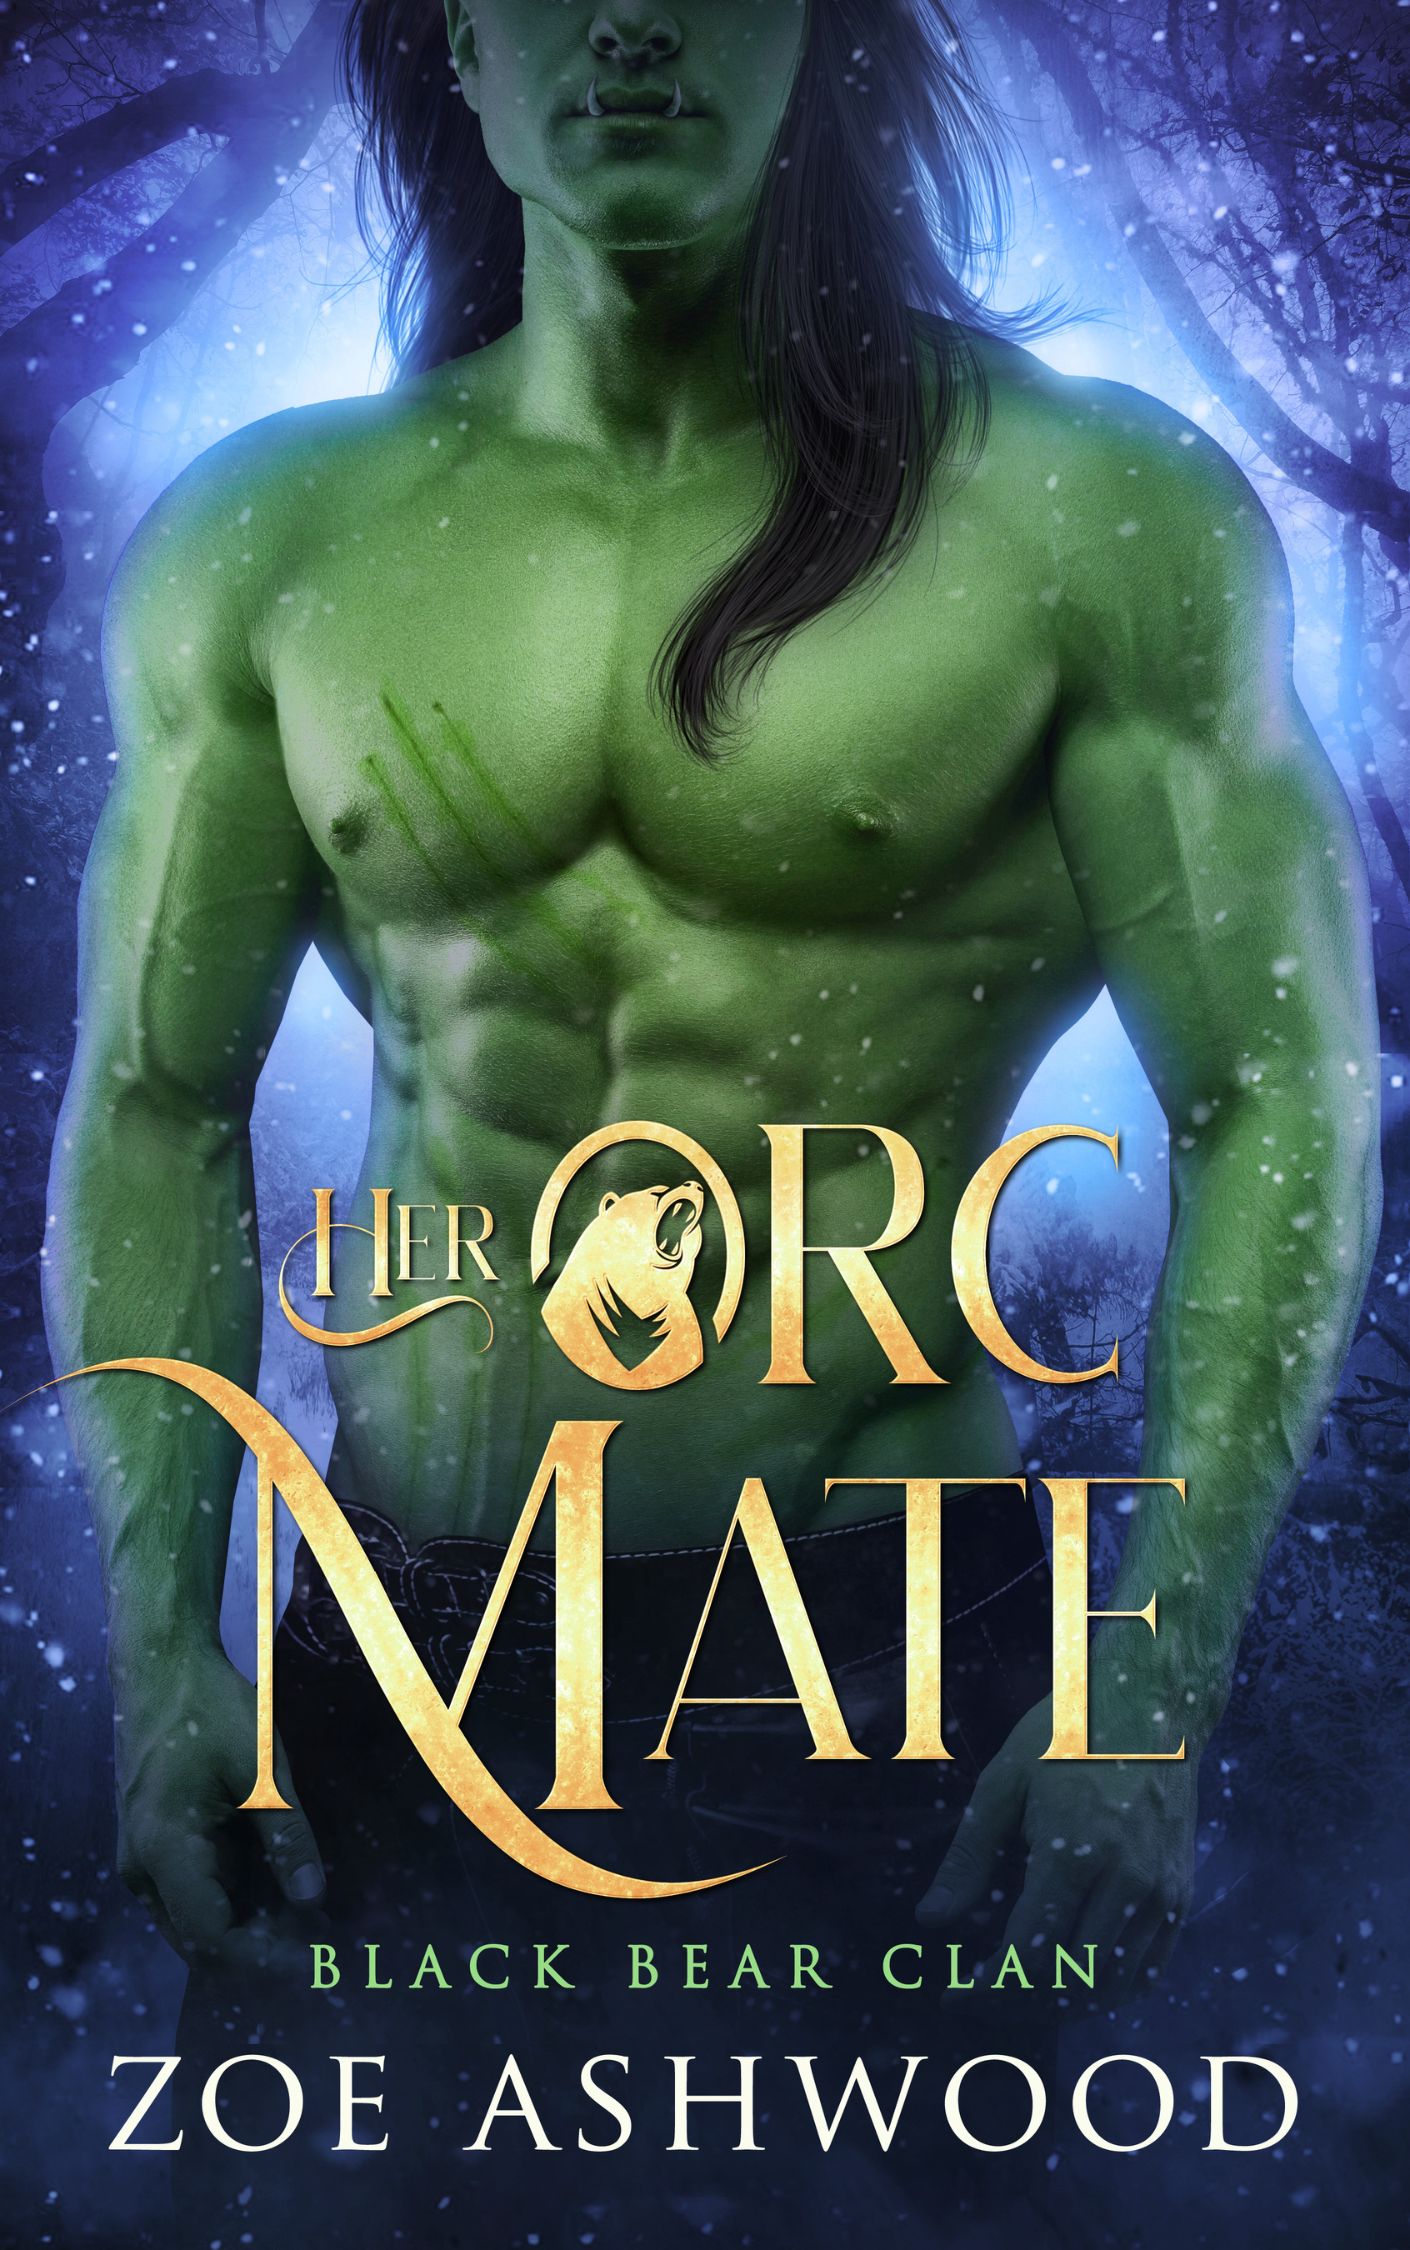 Her Orc Mate by Zoe Ashwood - orc fantasy romance